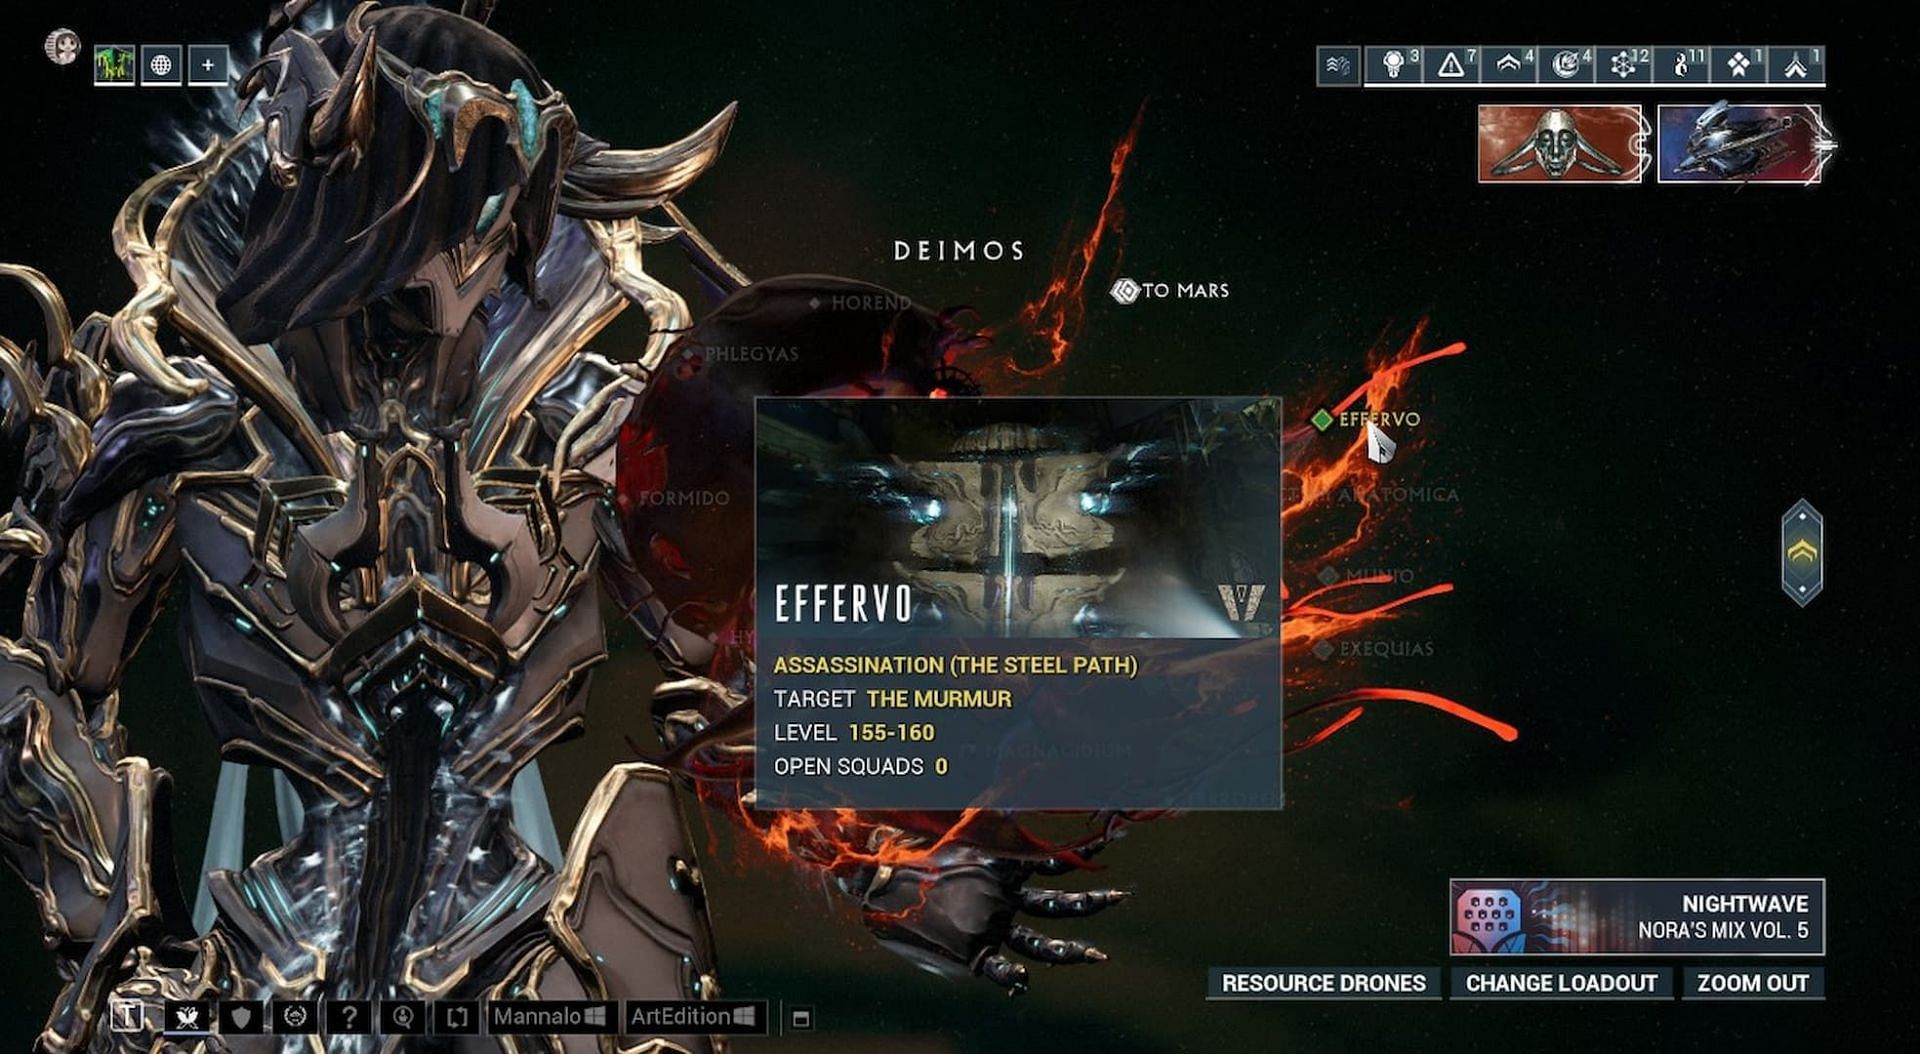 The Effervo node on Deimos is where the Operation practically takes place (Image via Digital Extremes)